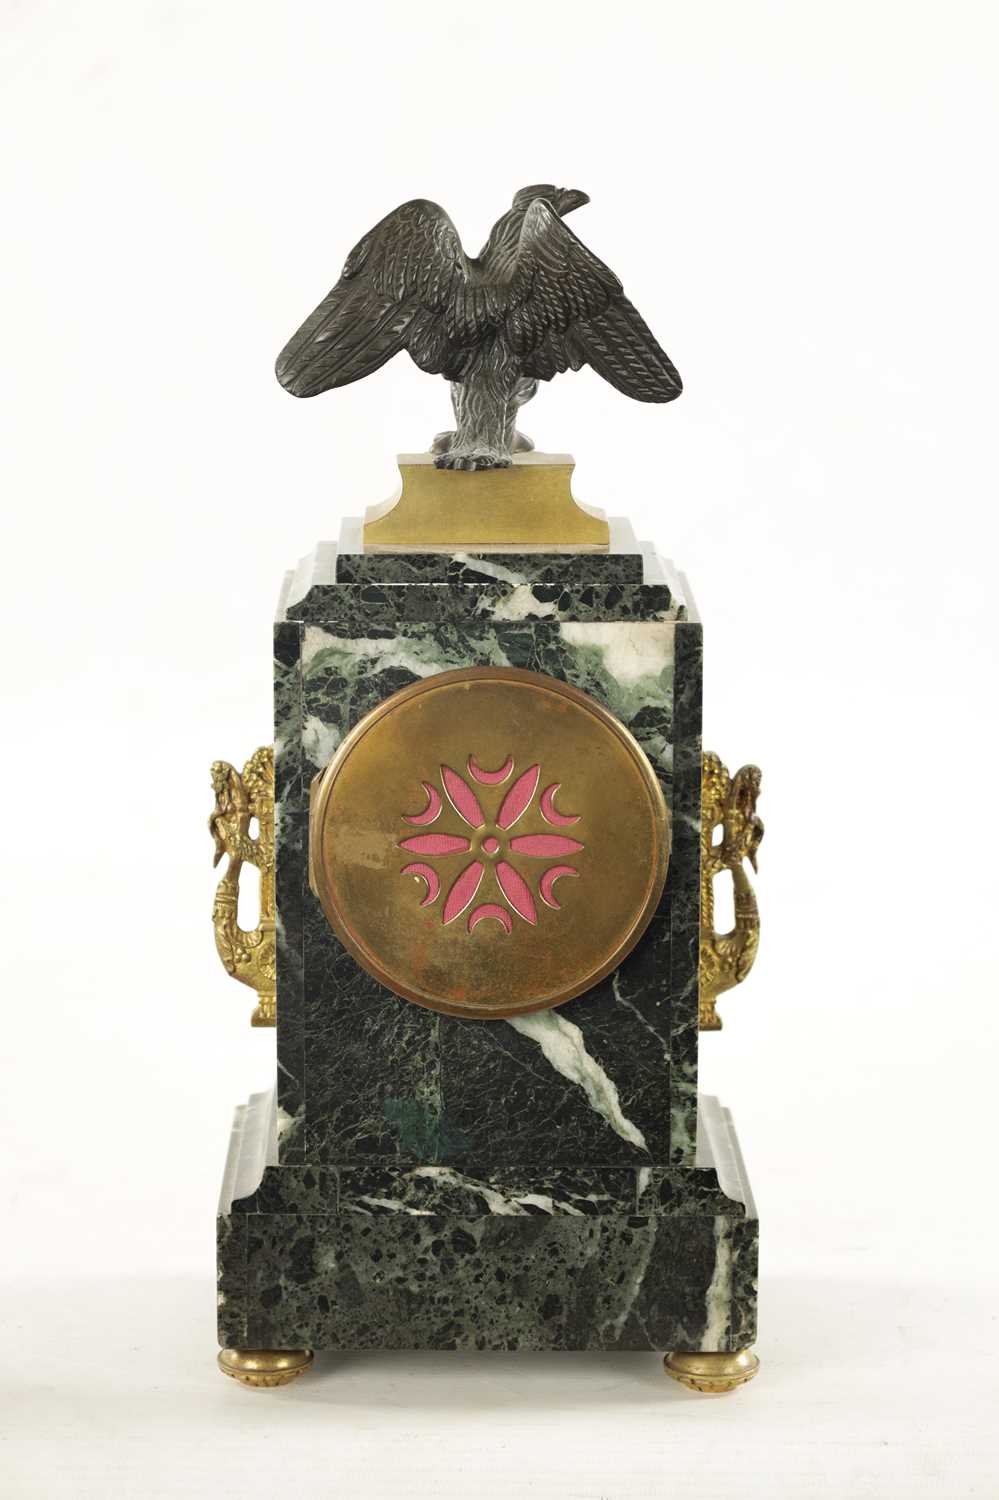 A LATE 19TH CENTURY FRENCH ANTICO VERDE MARBLE, BRONZE AND ORMOLU MANTEL CLOCK - Image 9 of 12